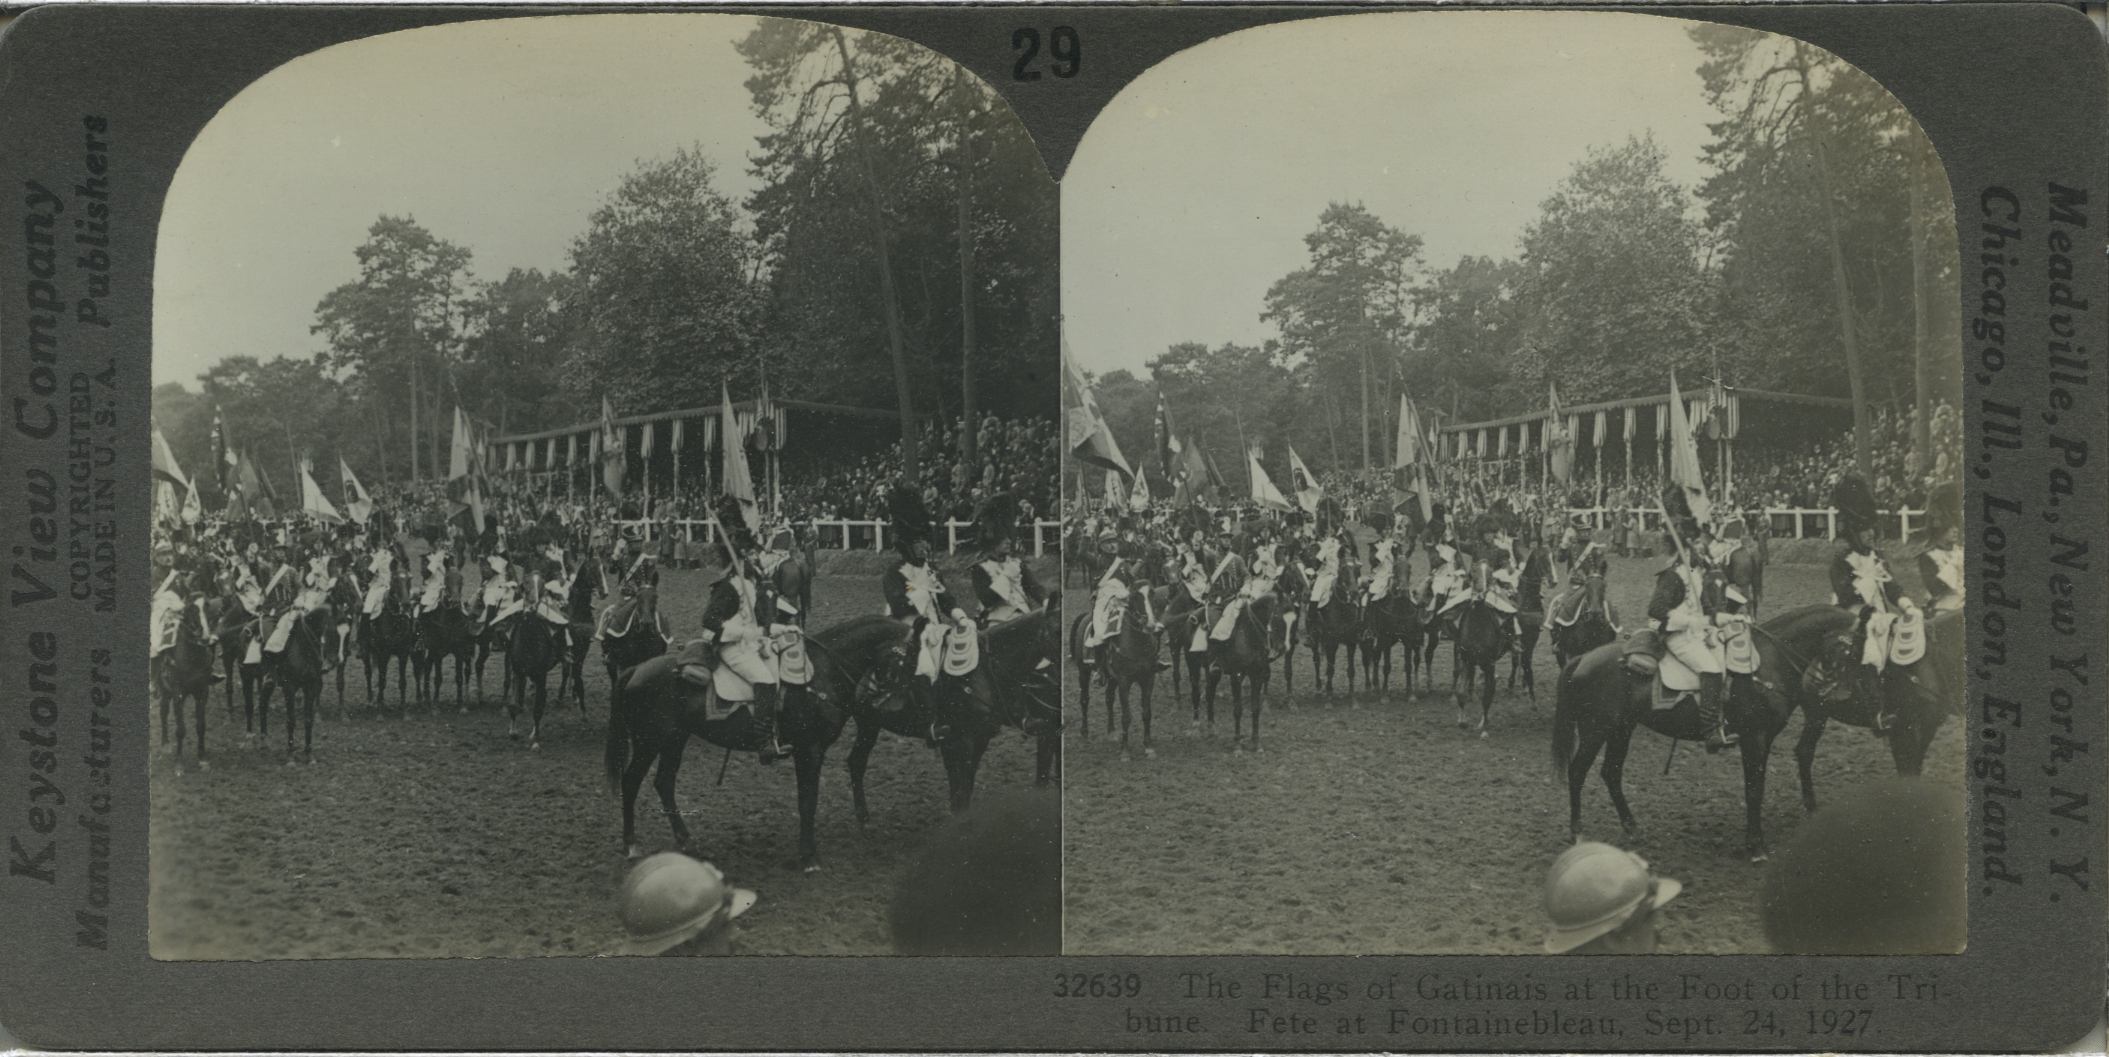 The Flags of Gatinais at the Foot of the Tribune. Fete at Fontainebleau, Sept. 24, 1927.